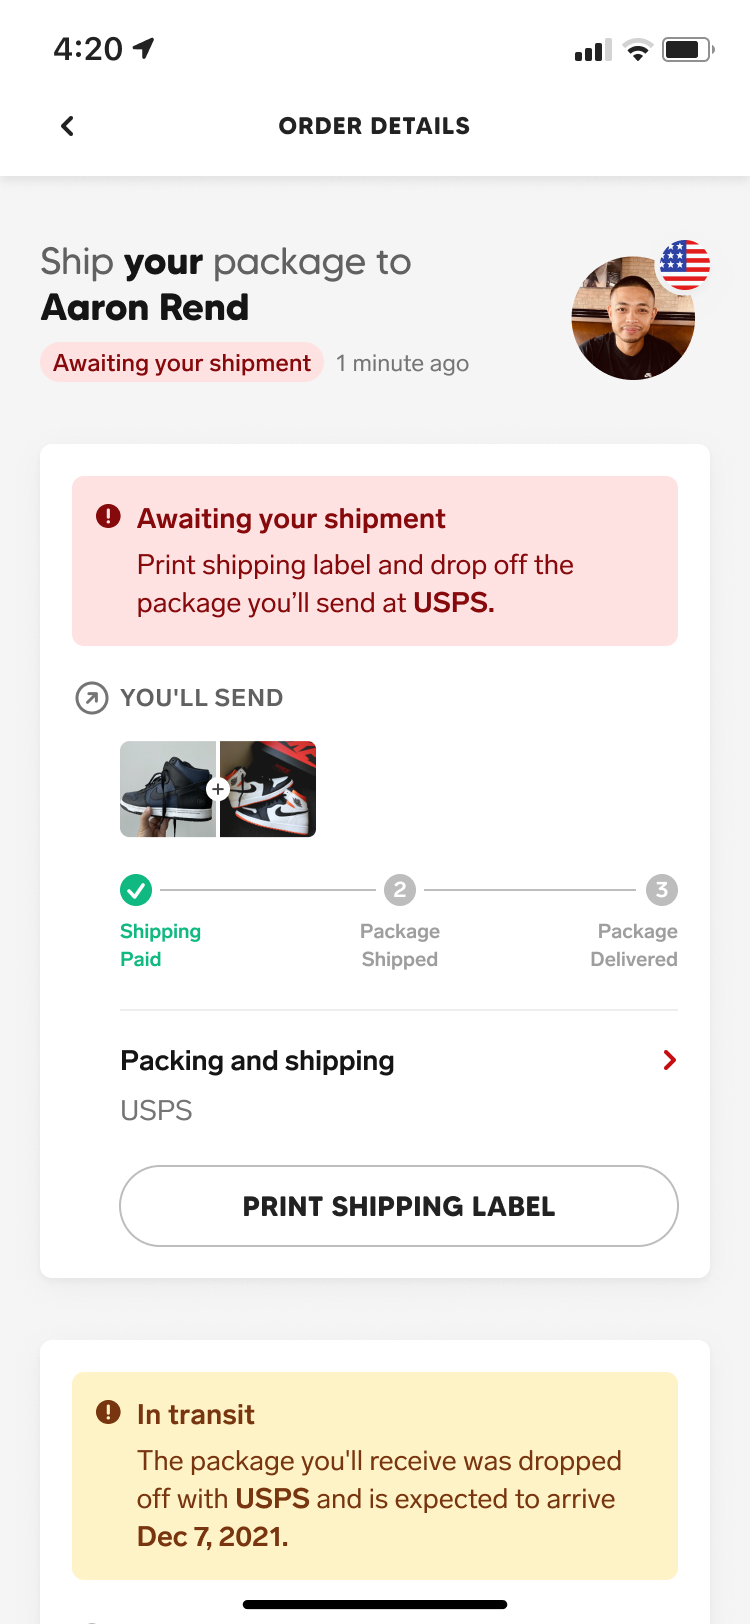 Order details screenshot of the Collect mobile app